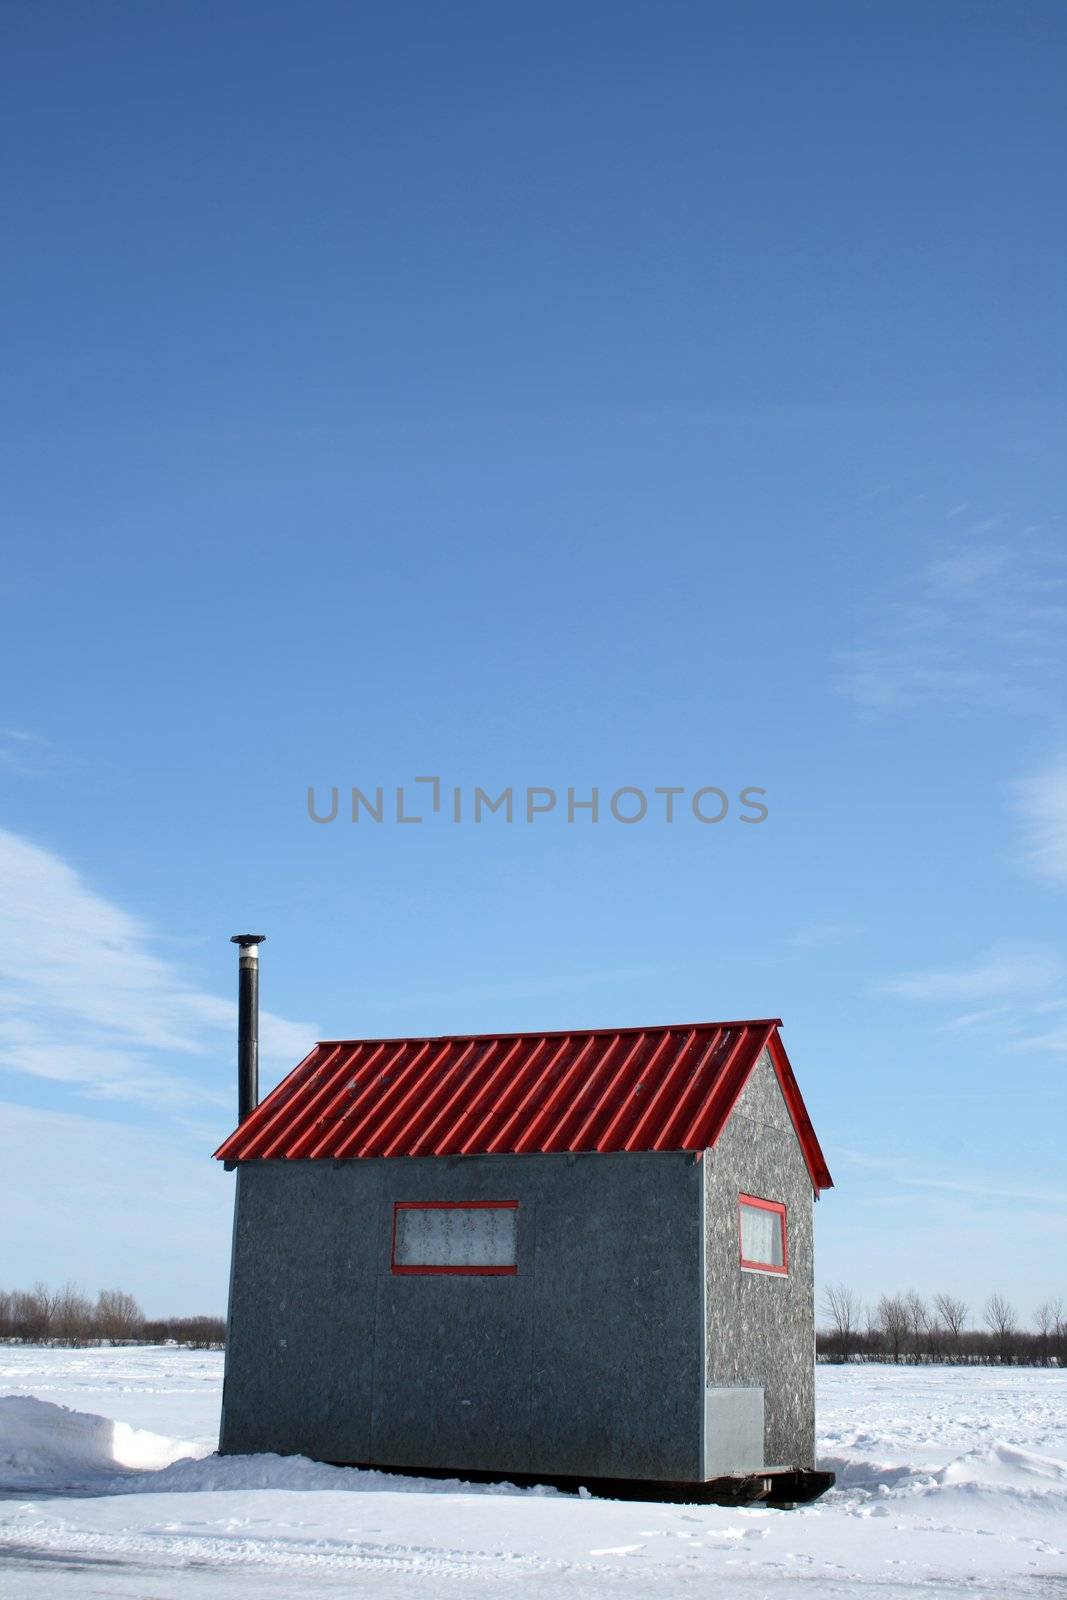 Ice fishing hut with red roof and chimney under the blue sky.